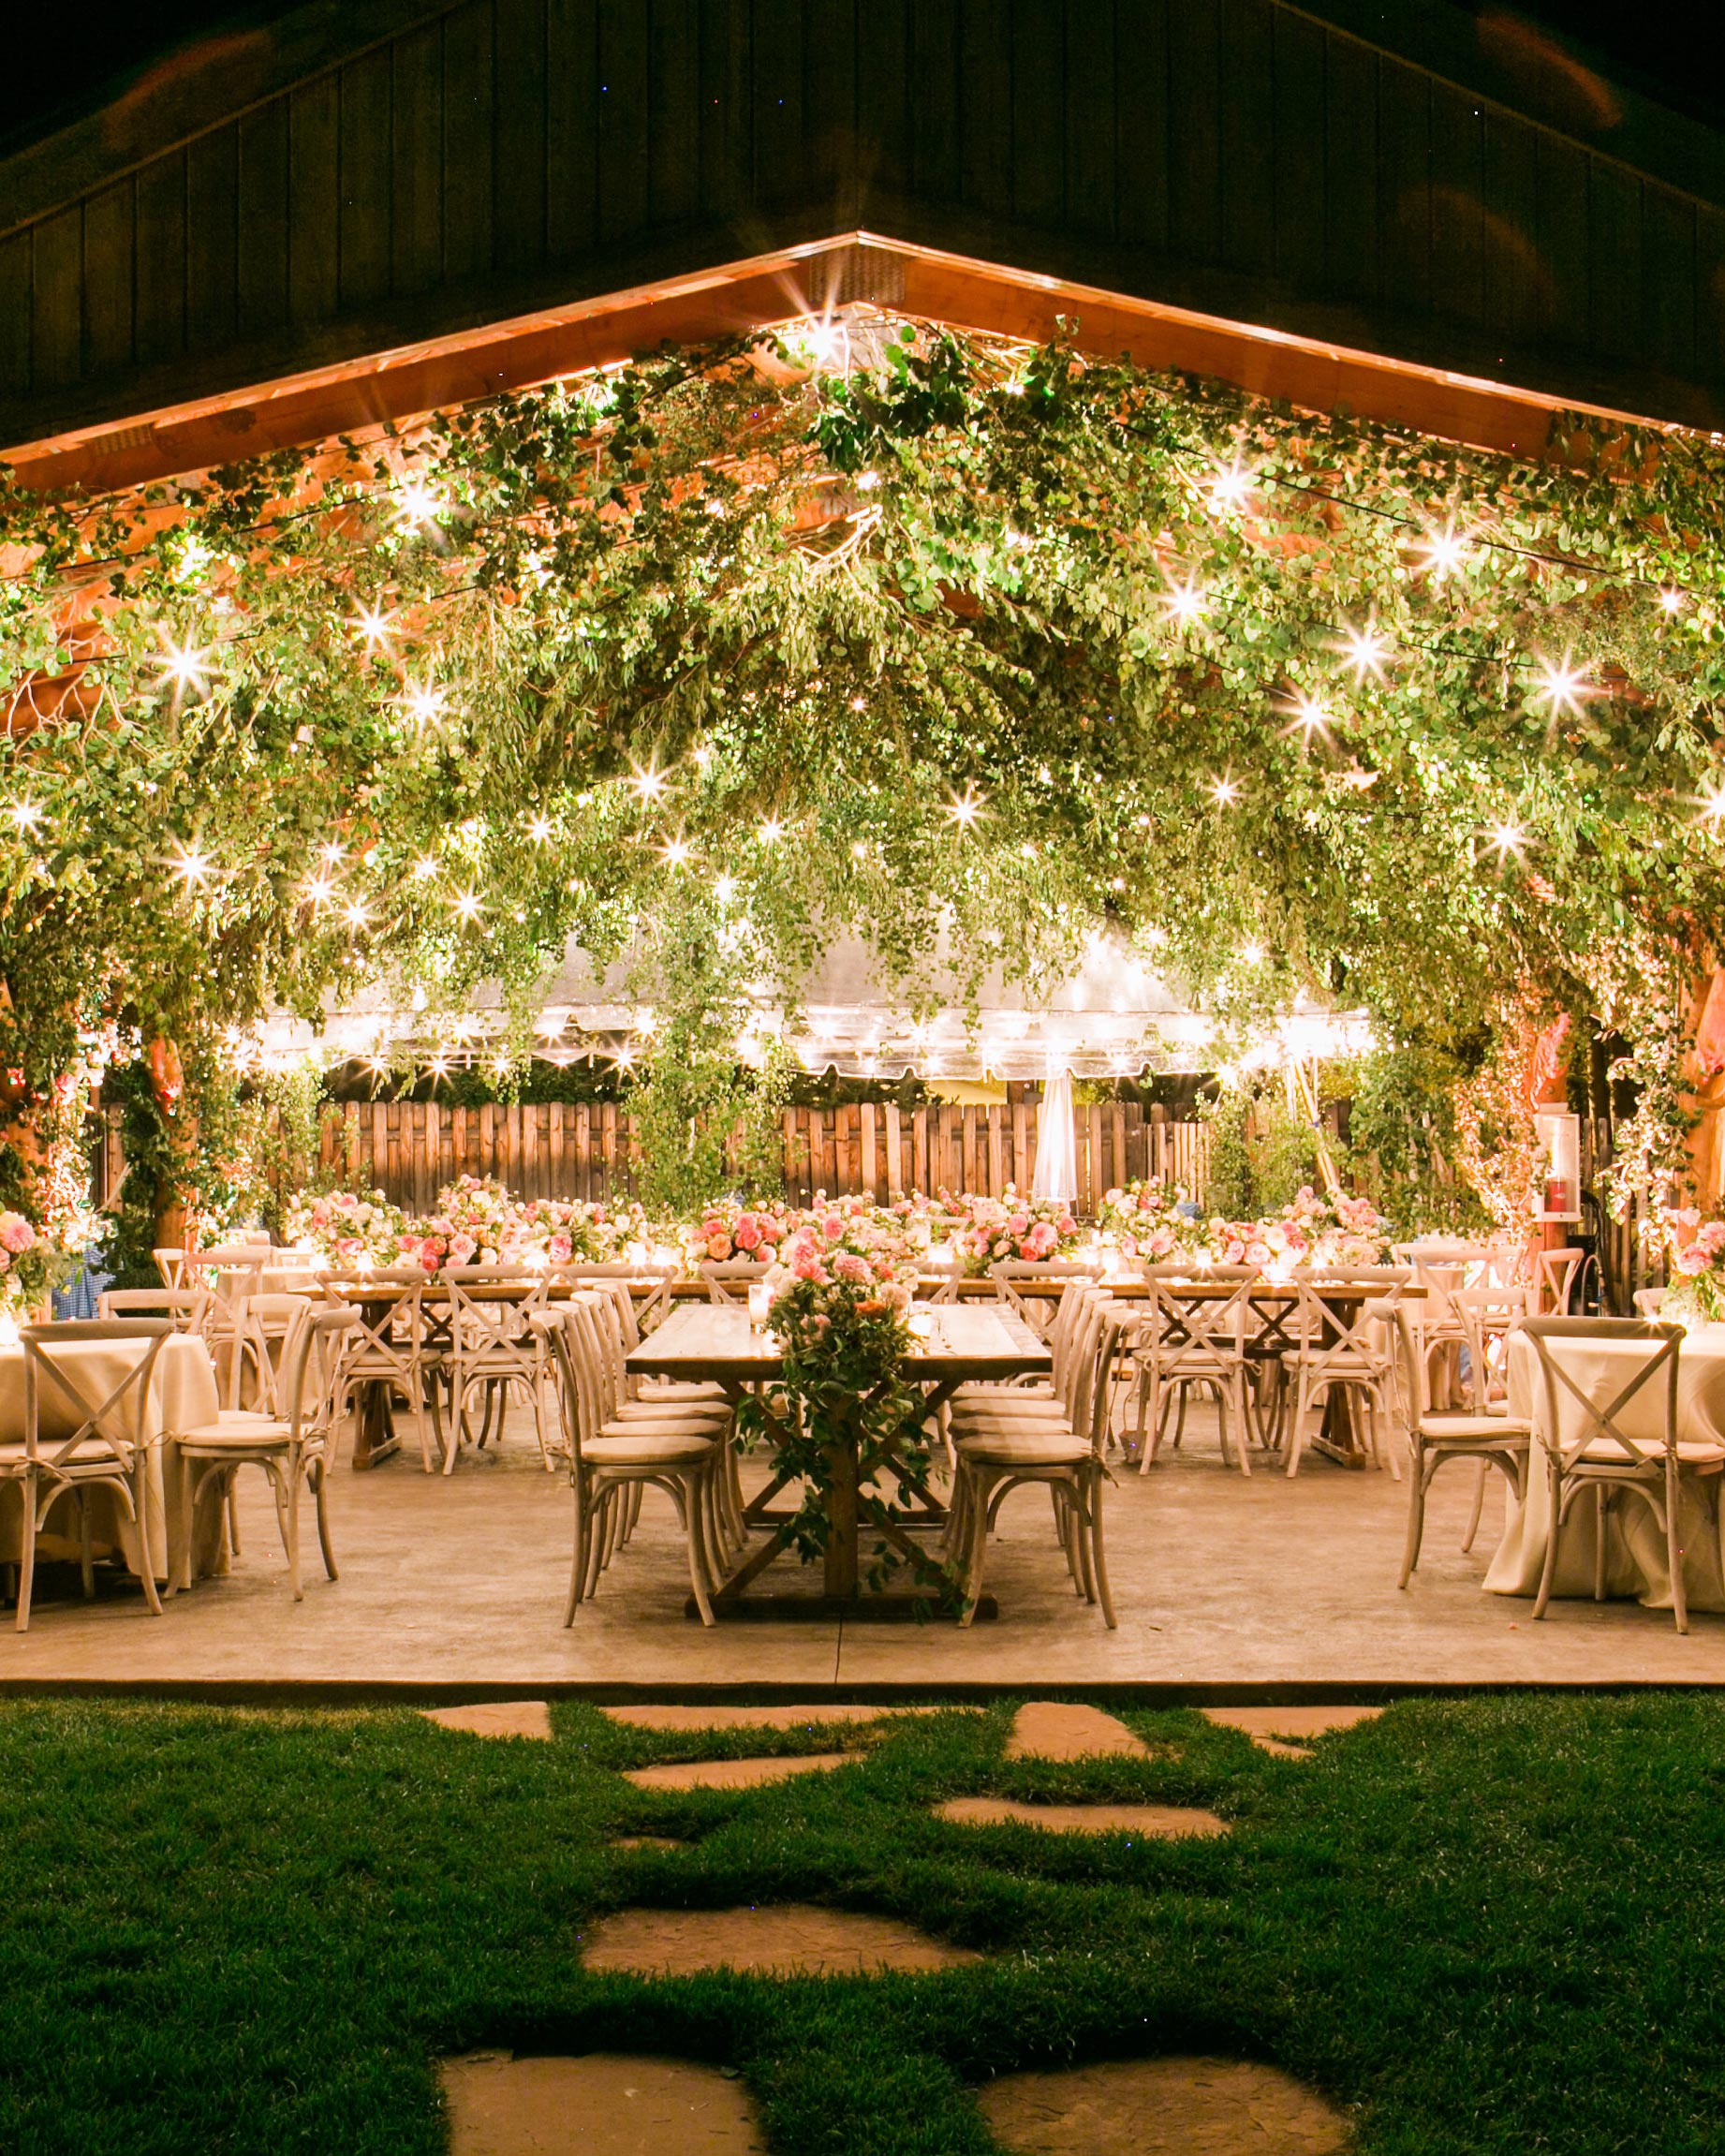 Why Does Wedding Lighting Cost So Much? The Pros Weigh In ...